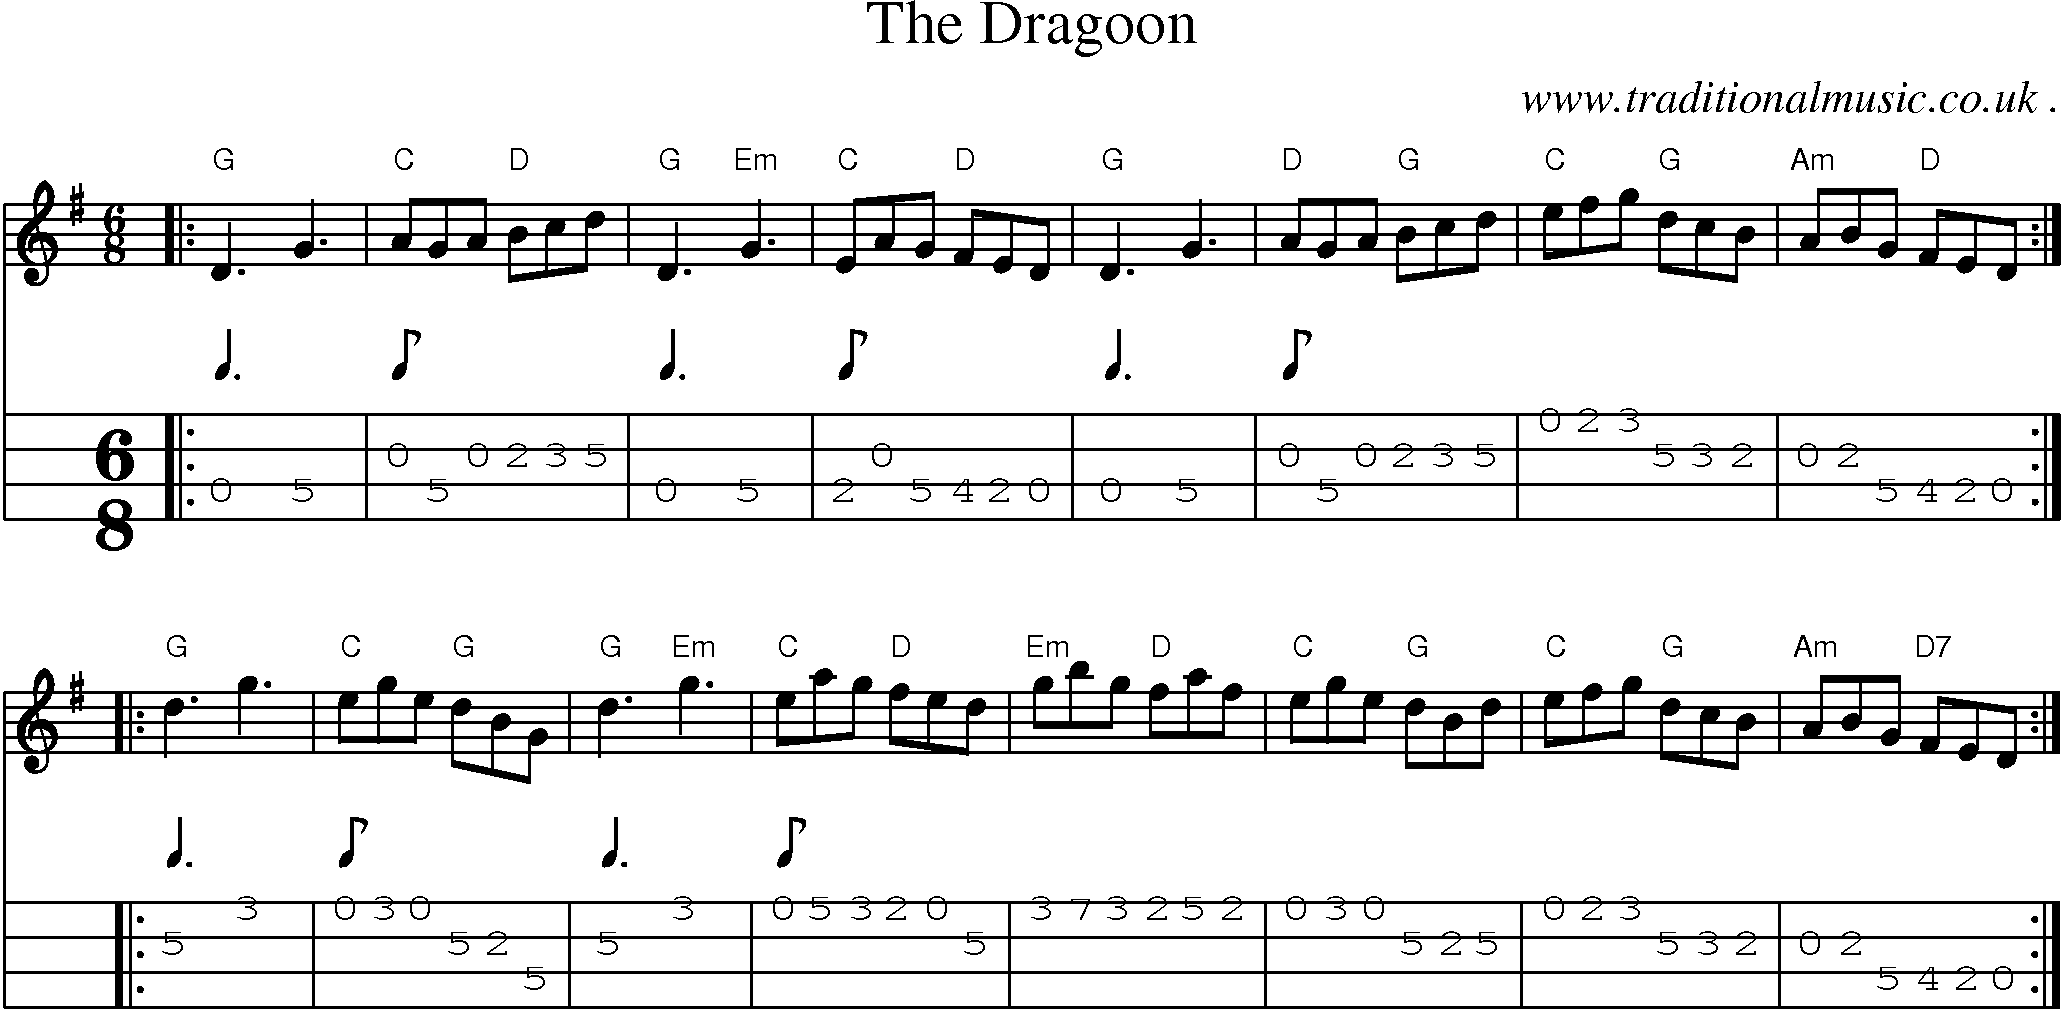 Sheet-music  score, Chords and Mandolin Tabs for The Dragoon